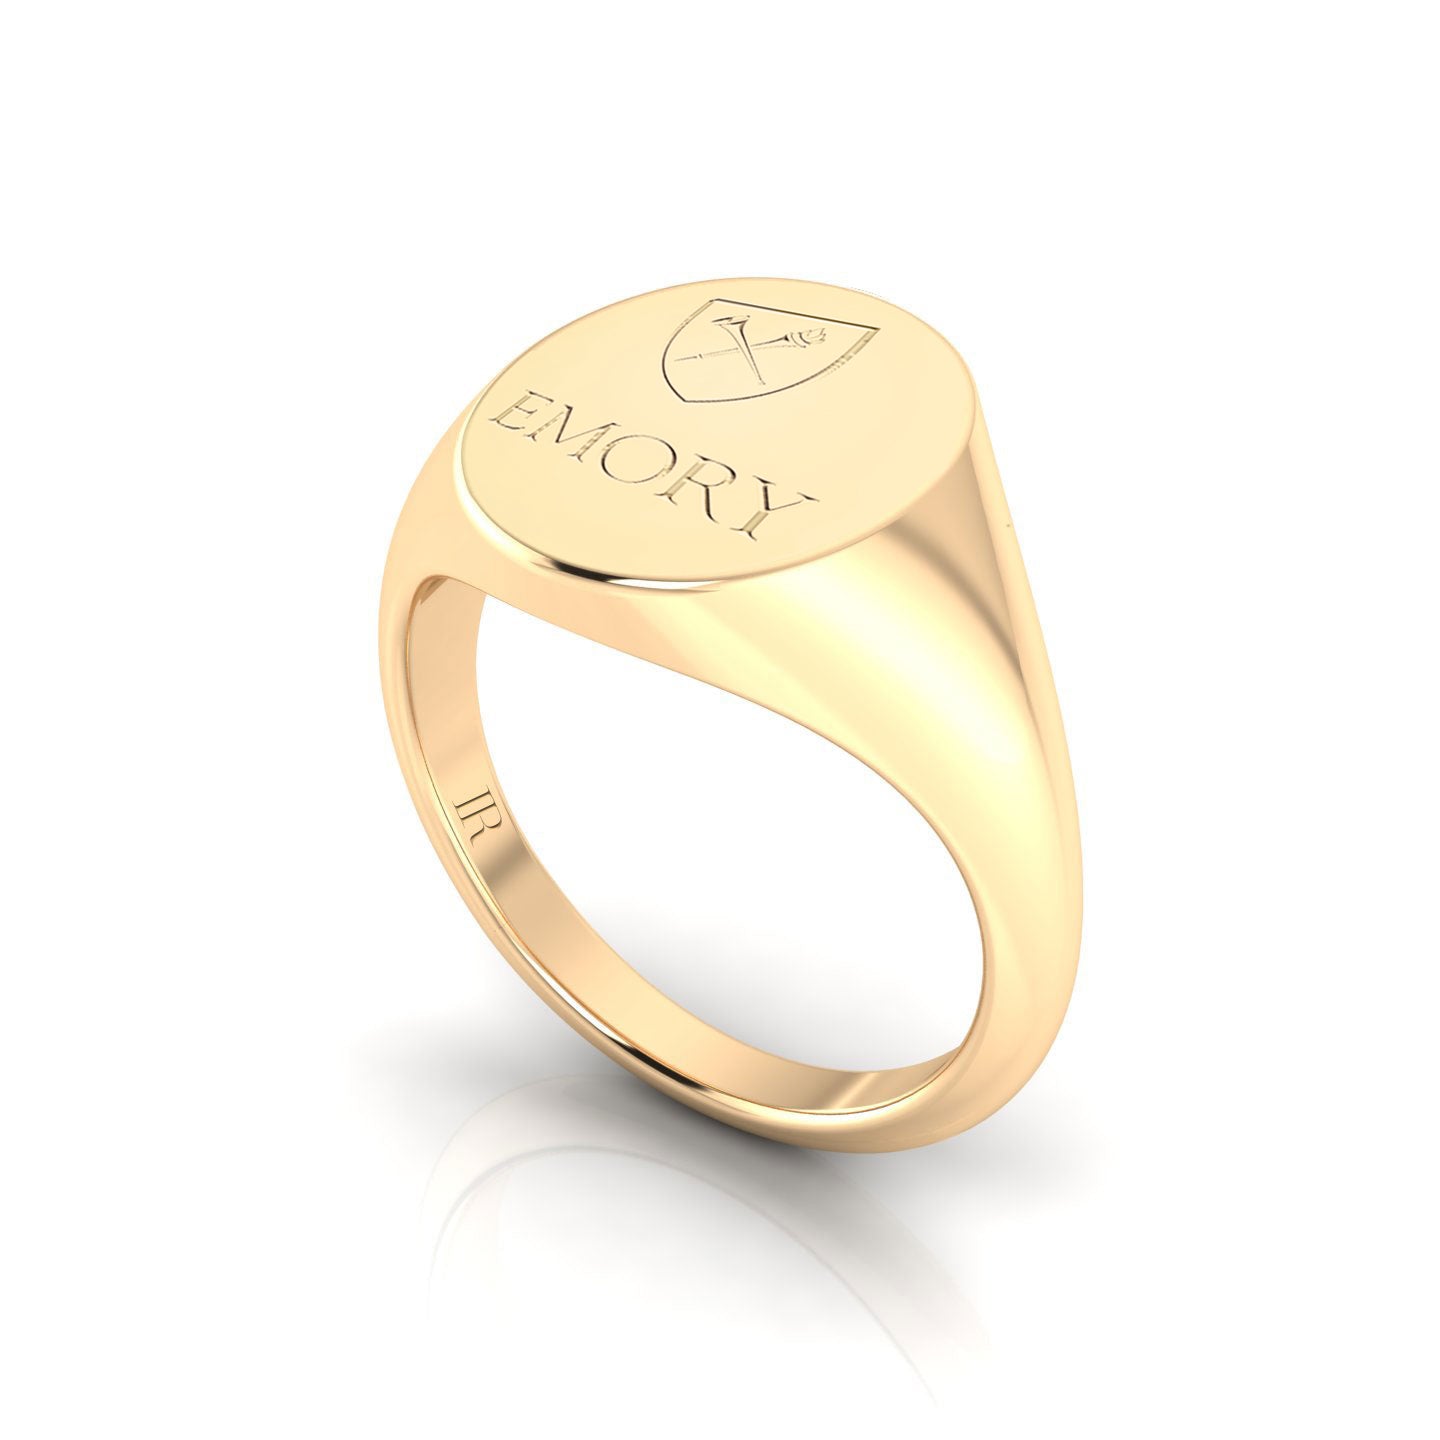 Side view of the Emory Oval Heritage Class Ring in 14KT yellow gold, highlighting its meticulous craftsmanship and elegant curves.